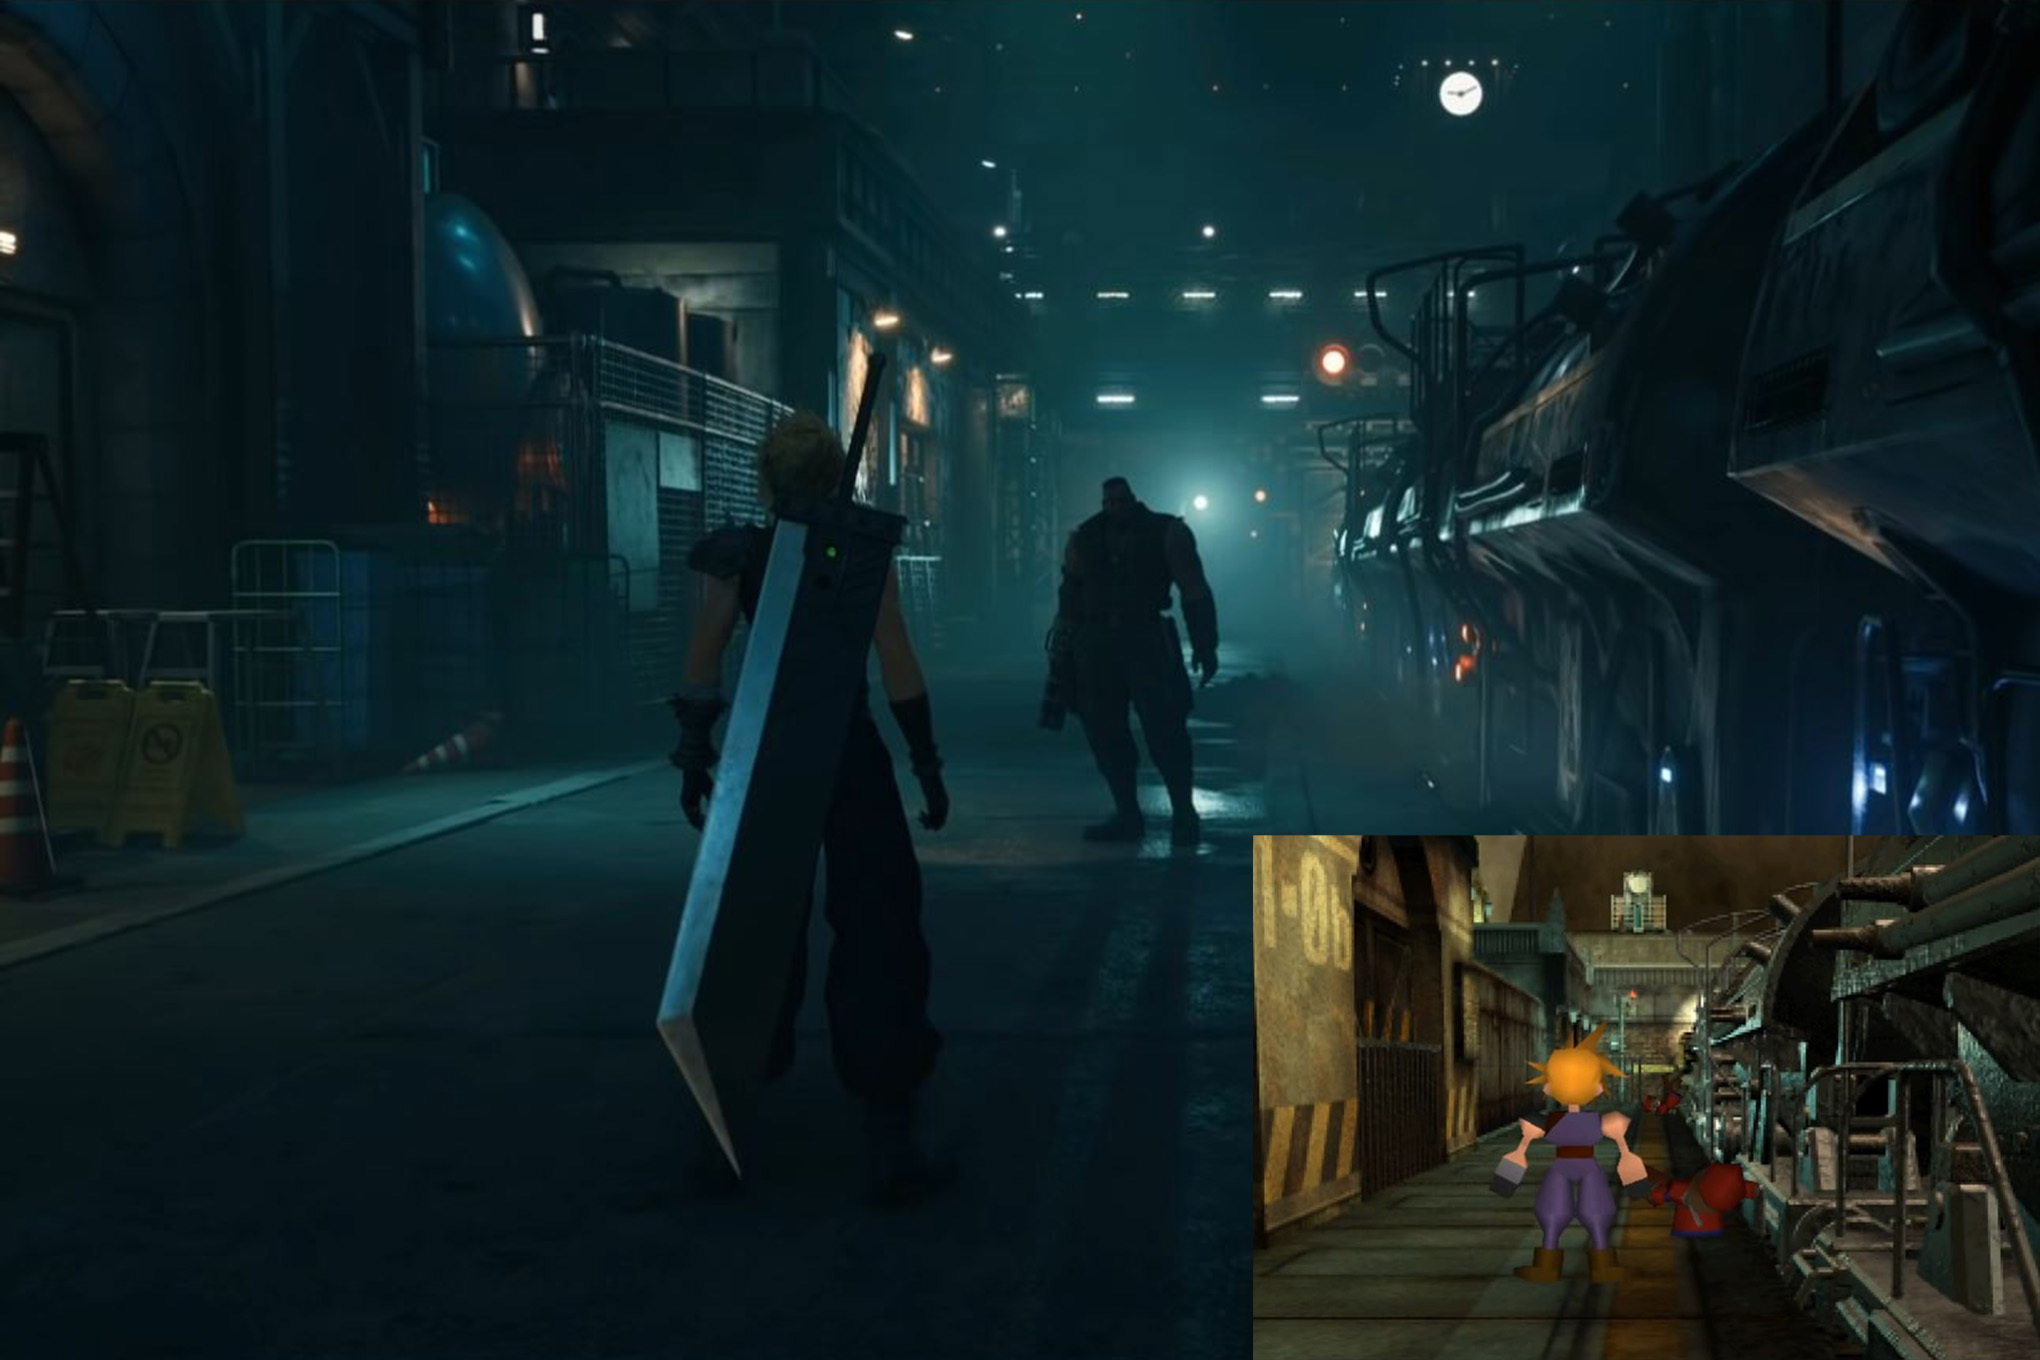 a comparison shot shows the original final fantasy 7 and then the same camera angle int he remake